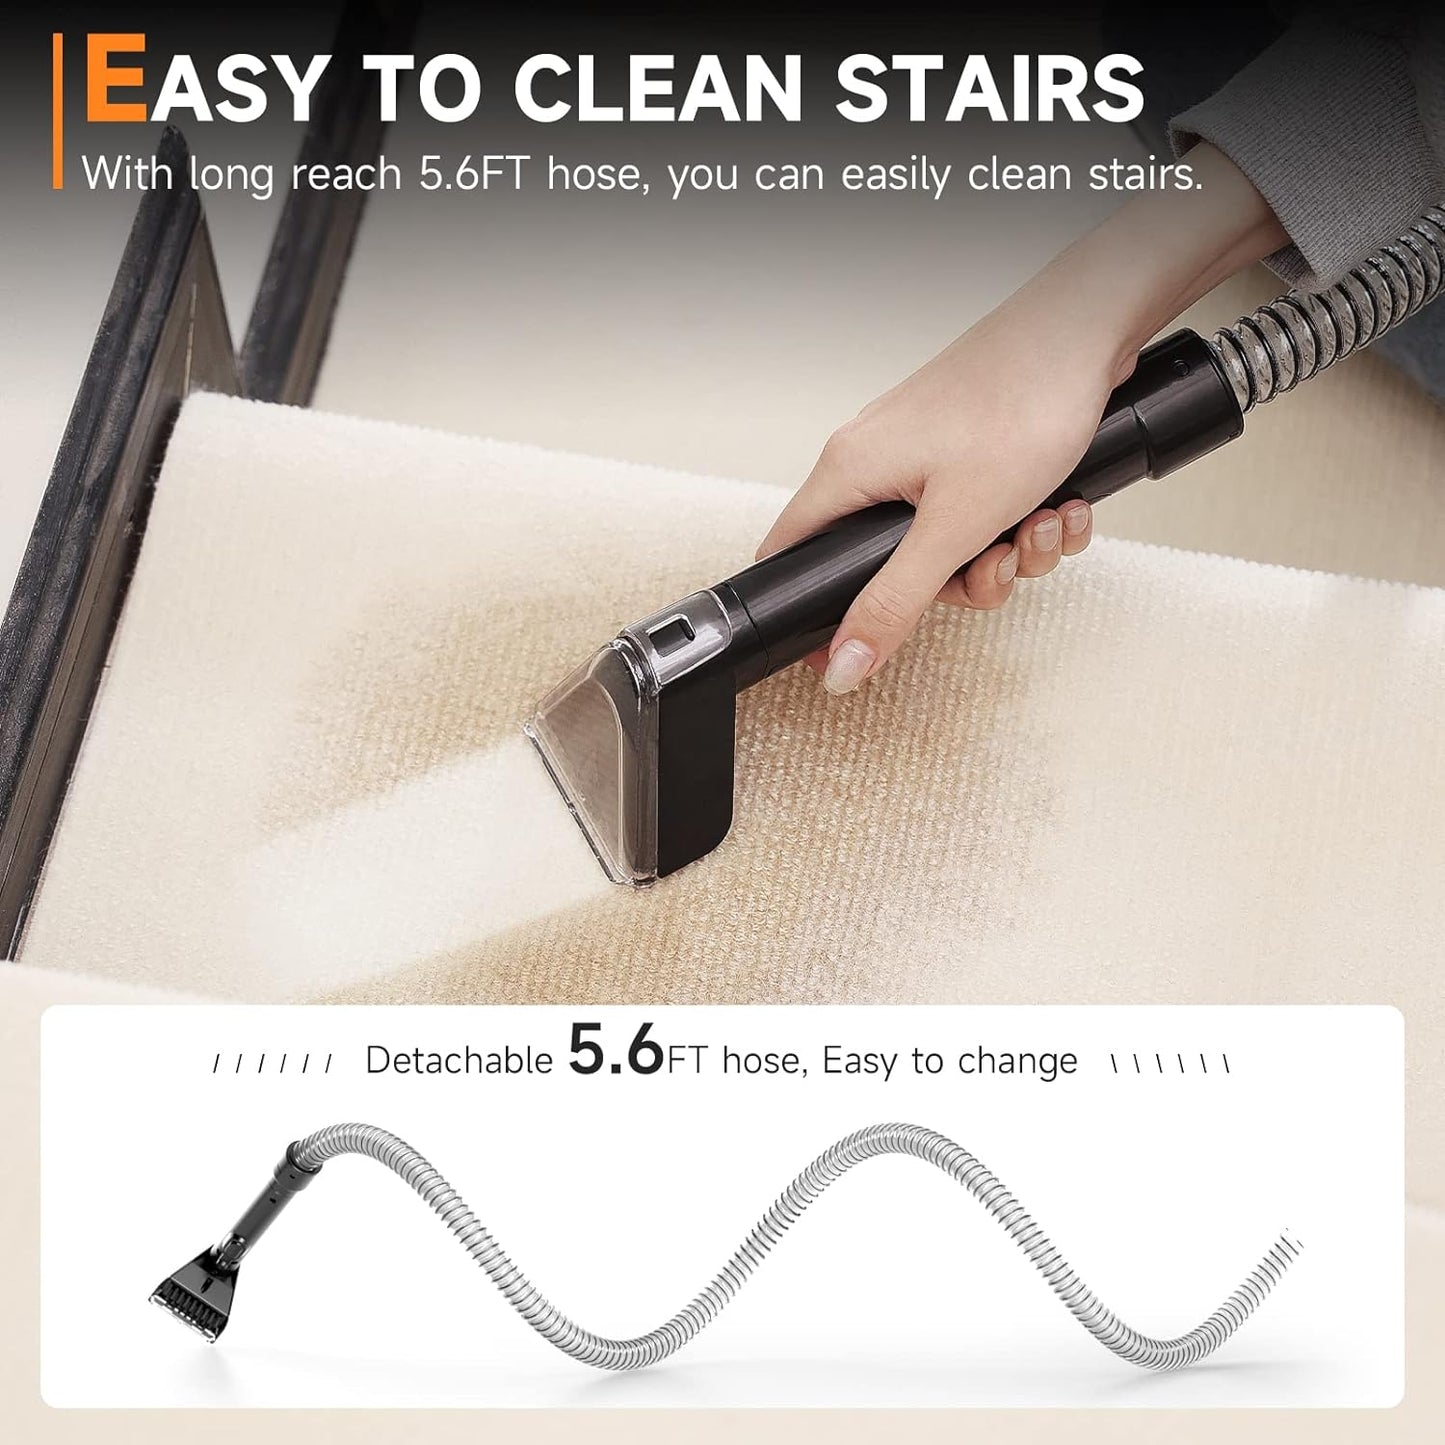 TAB Carpet Cleaner Machine, FastHeating Portable Upholstery Spot Cleaner Shampooer Machine, 14KPa Stain Remover Deep Cleaner for Pets,Stairs,Car Seat and Couch, Self-Cleaning, 140℉ Heat Wash, R6